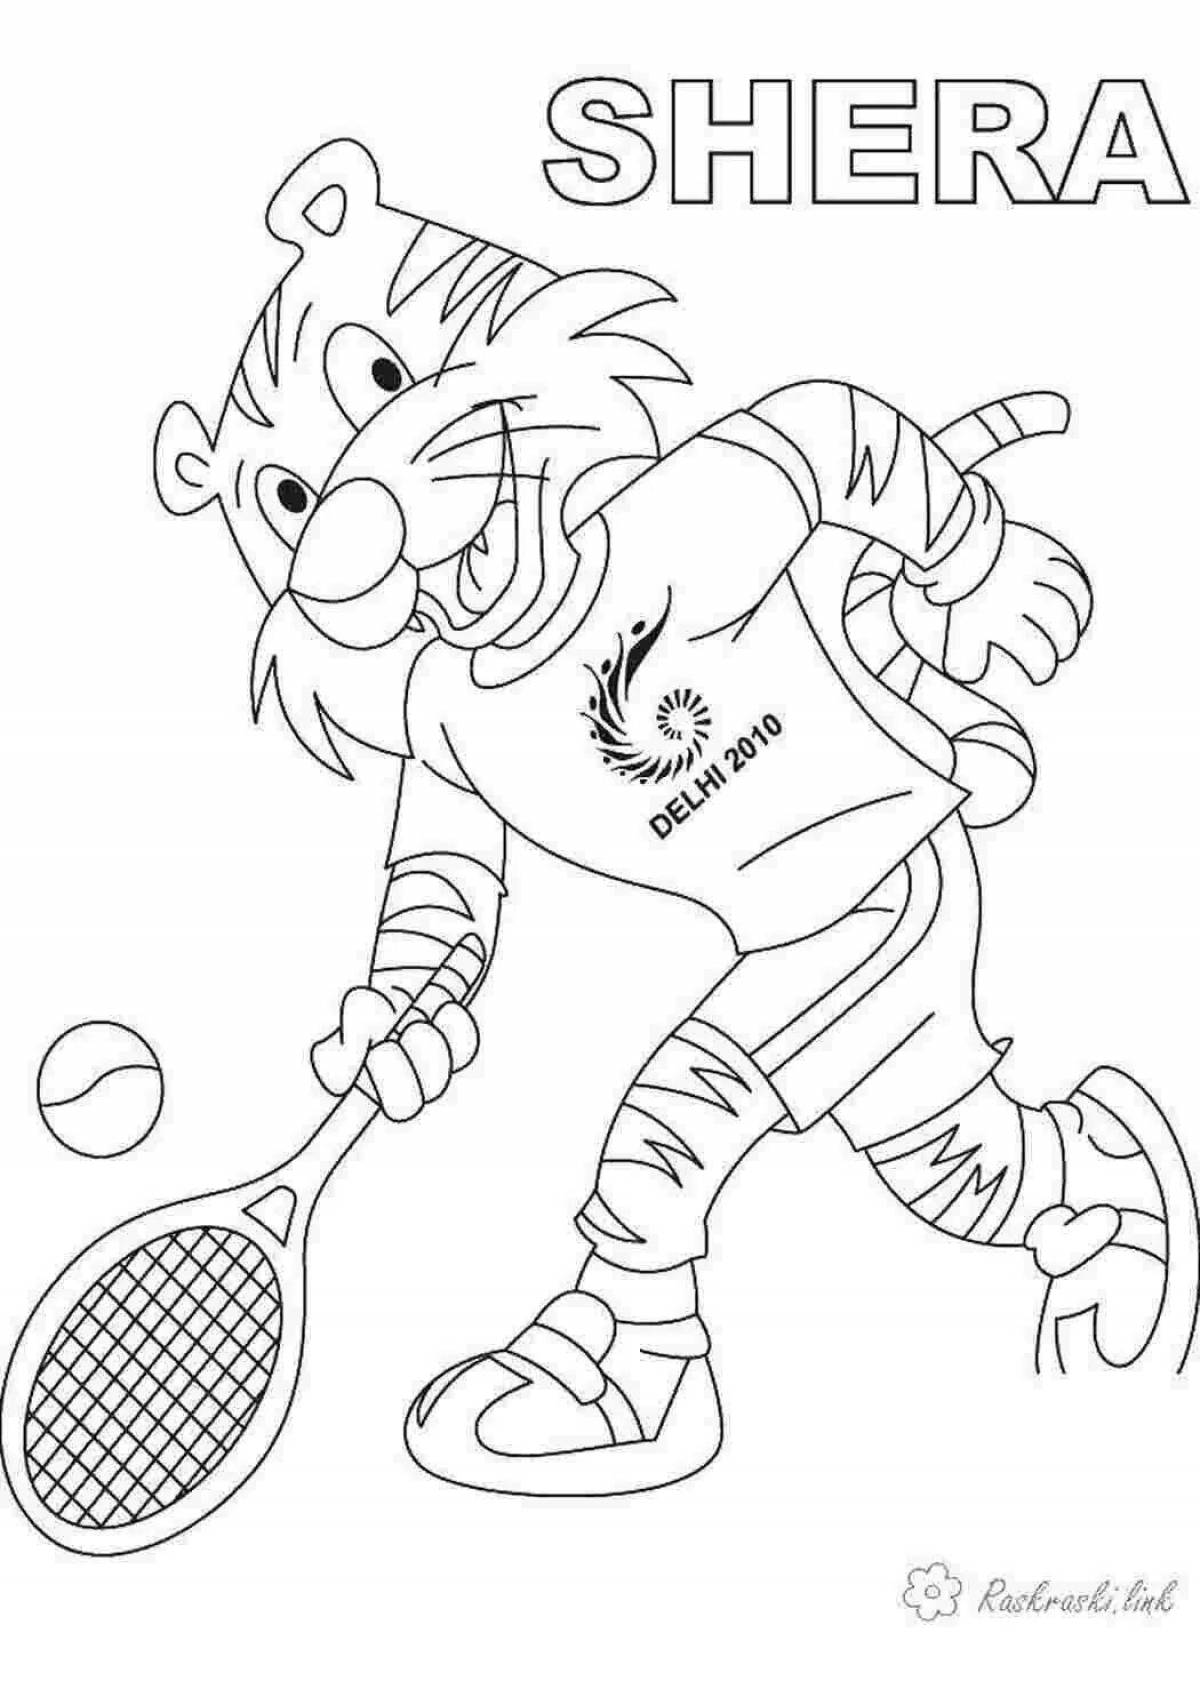 Exquisite sports coloring book for kids